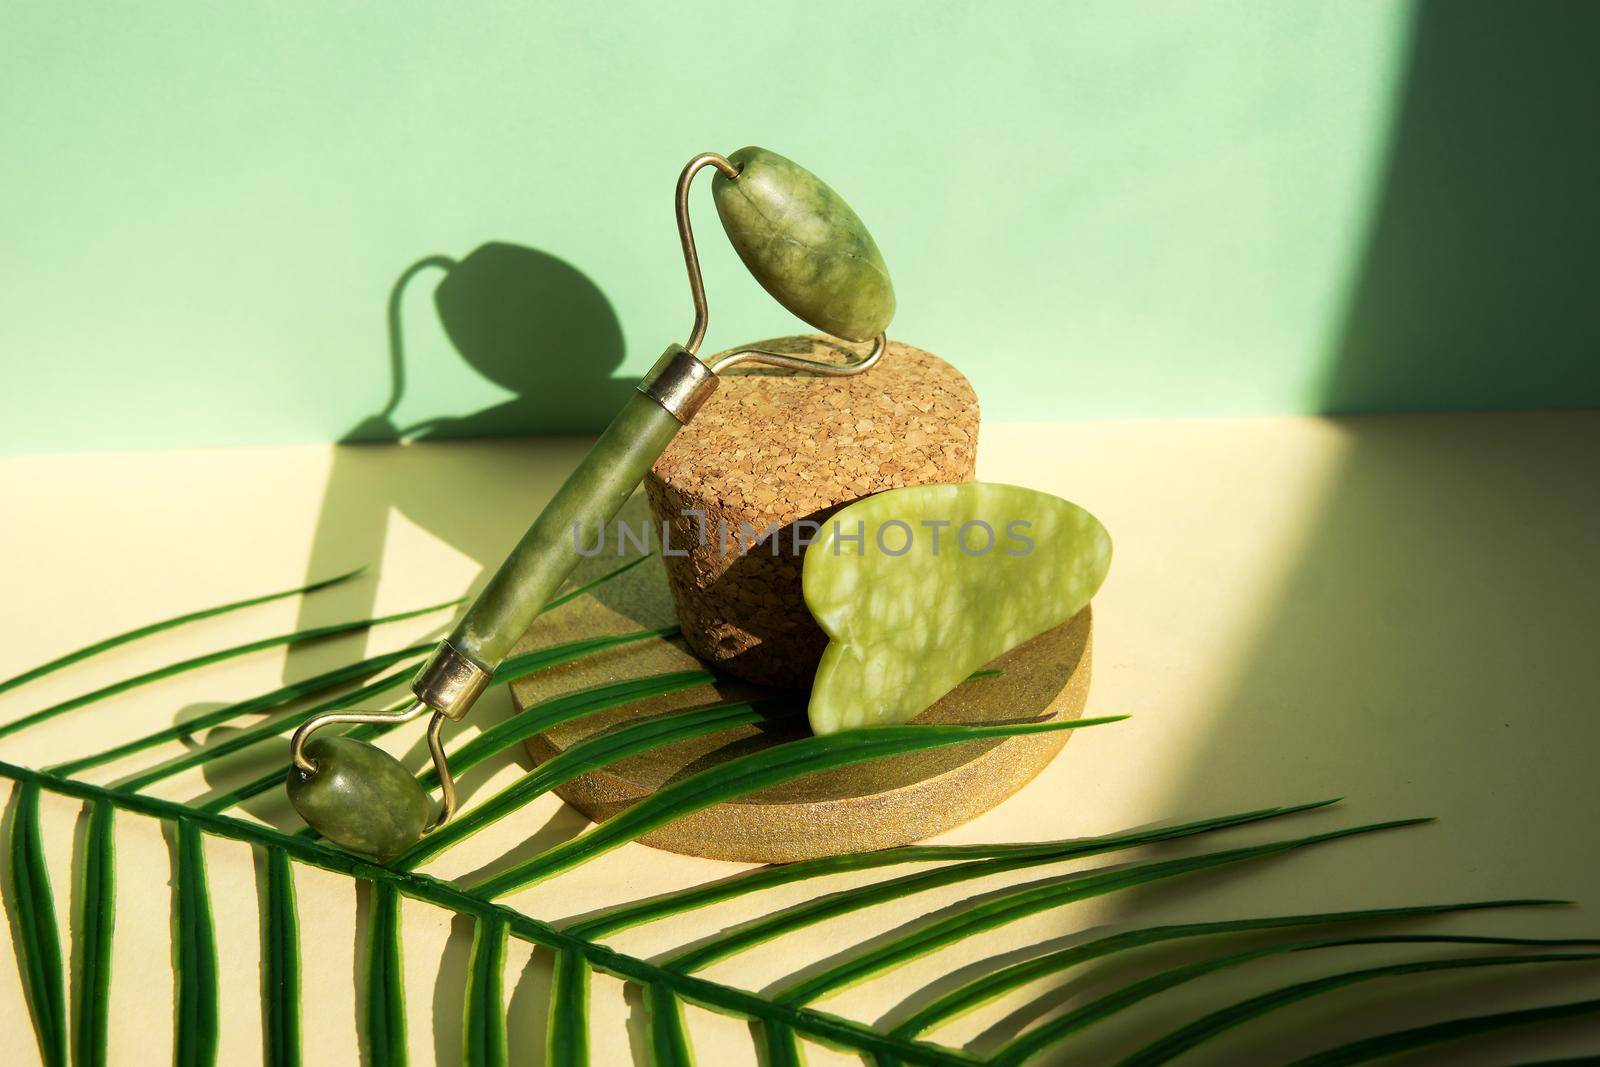 Jade Gua sha scraper and facial massager on beige background. Hard light, shadows, the concept self-care. Facial care. Zero waste. Lifting and toning treatment at home.